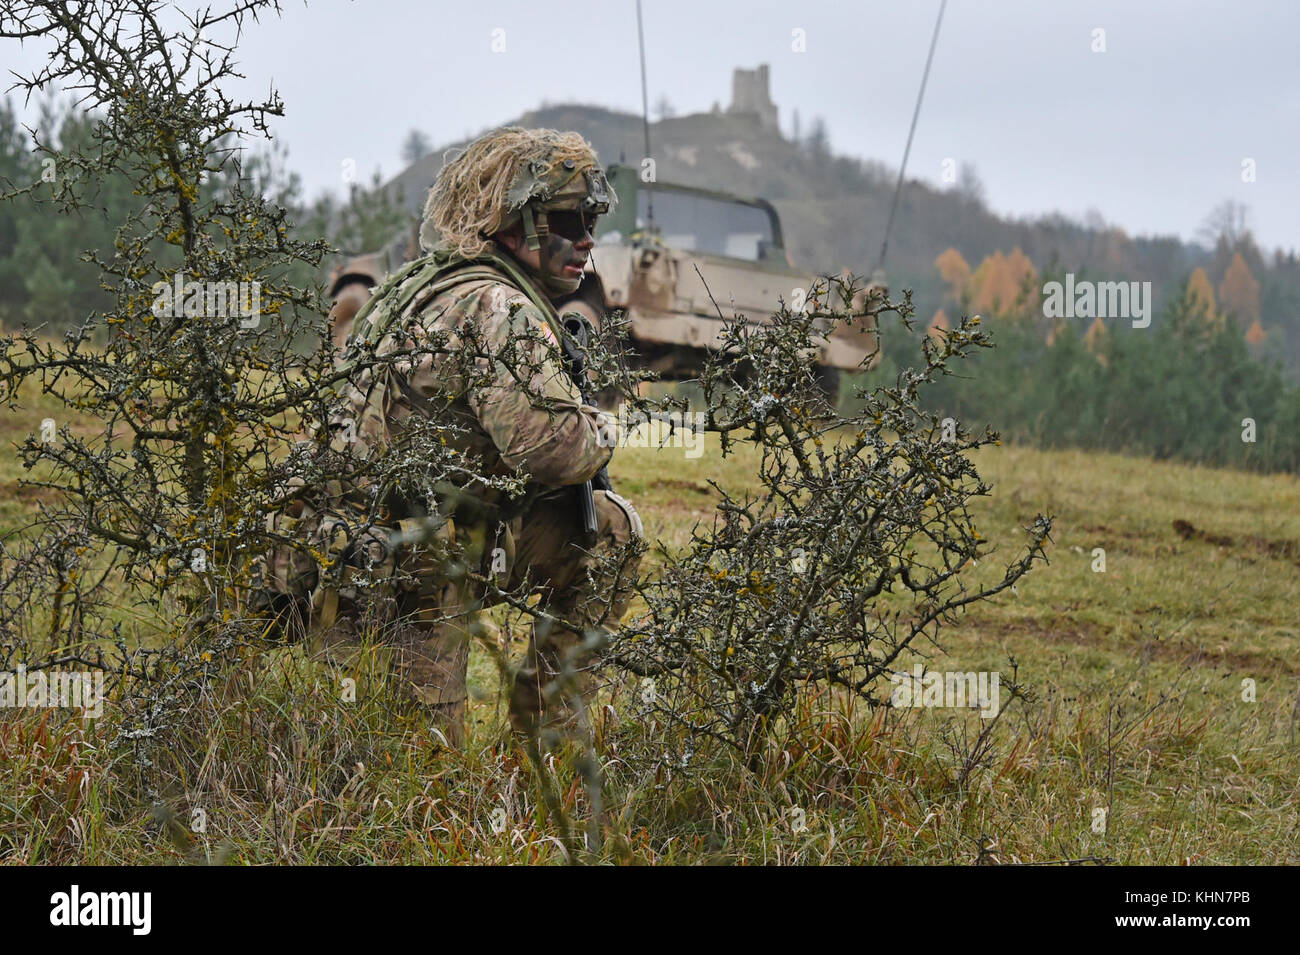 U.S. Army Staff Sgt. Marcin Szewczyk with 1st Squadron, 2nd Cavalry Regiment overlooks the terrain during Exercise Allied Spirit VII at the 7th Army Training Command’s Hohenfels Training Area, Germany, Nov. 16, 2017. Approximately 4,050 service members from 13 nations are participating in the exercise from Oct. 30 to Nov. 22, 2017. Allied Spirit is a U.S. Army Europe-directed, 7ATC-conducted multinational exercise series designed to develop and enhance NATO and key partner’s interoperability and readiness. (U.S. Army photo by Gertrud Zach) Stock Photo